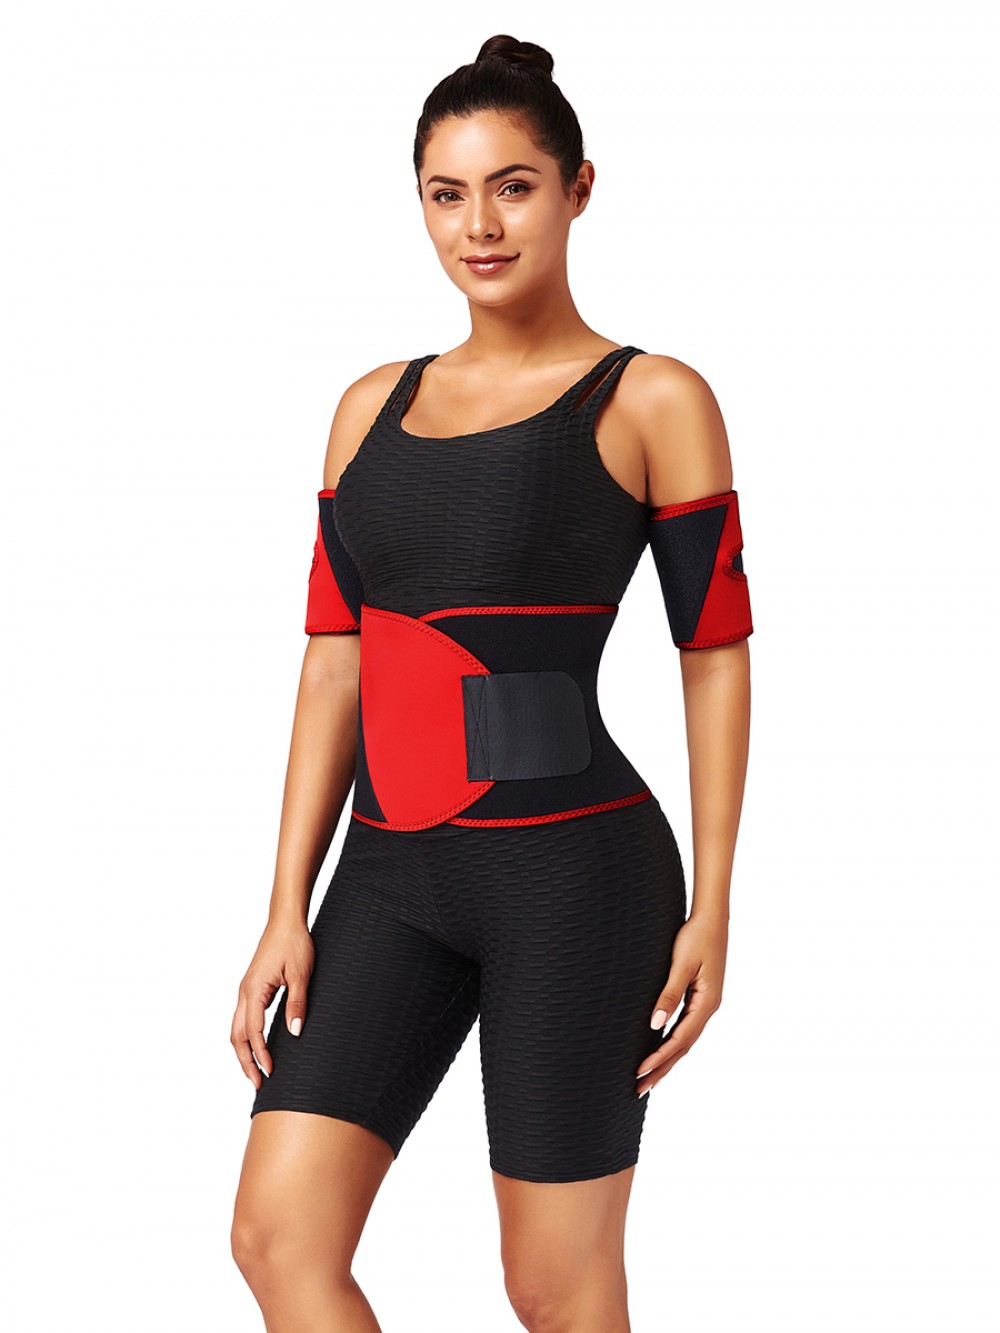 Red 2Pcs Colorblock Neoprene Arm Trimmers Sensual Curves